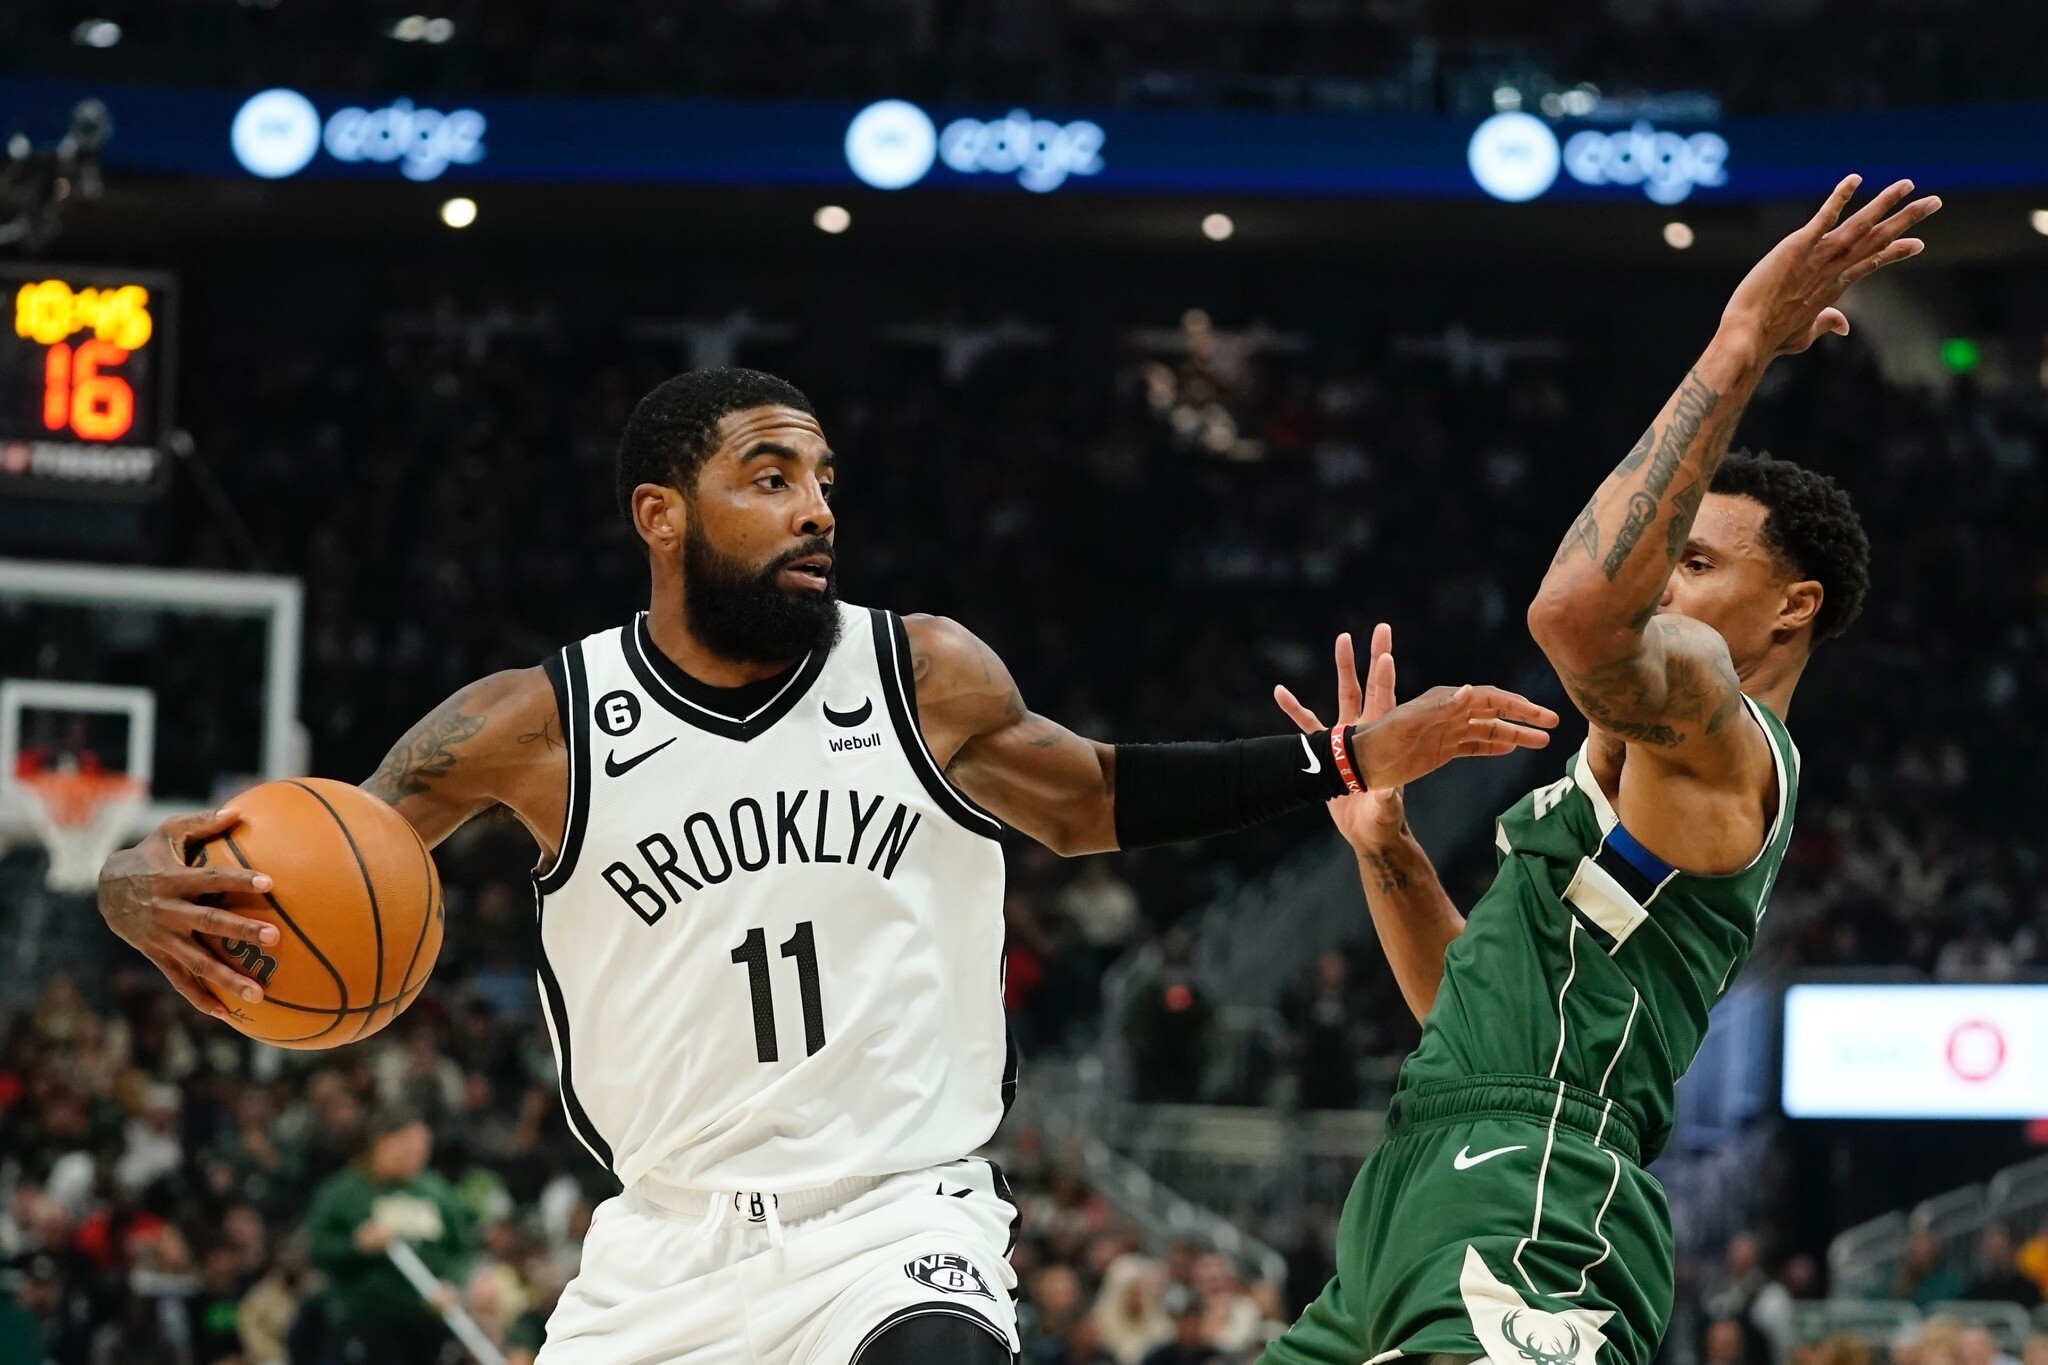 Brooklyn Nets Kyrie Irving Returns to the Court Sunday Night